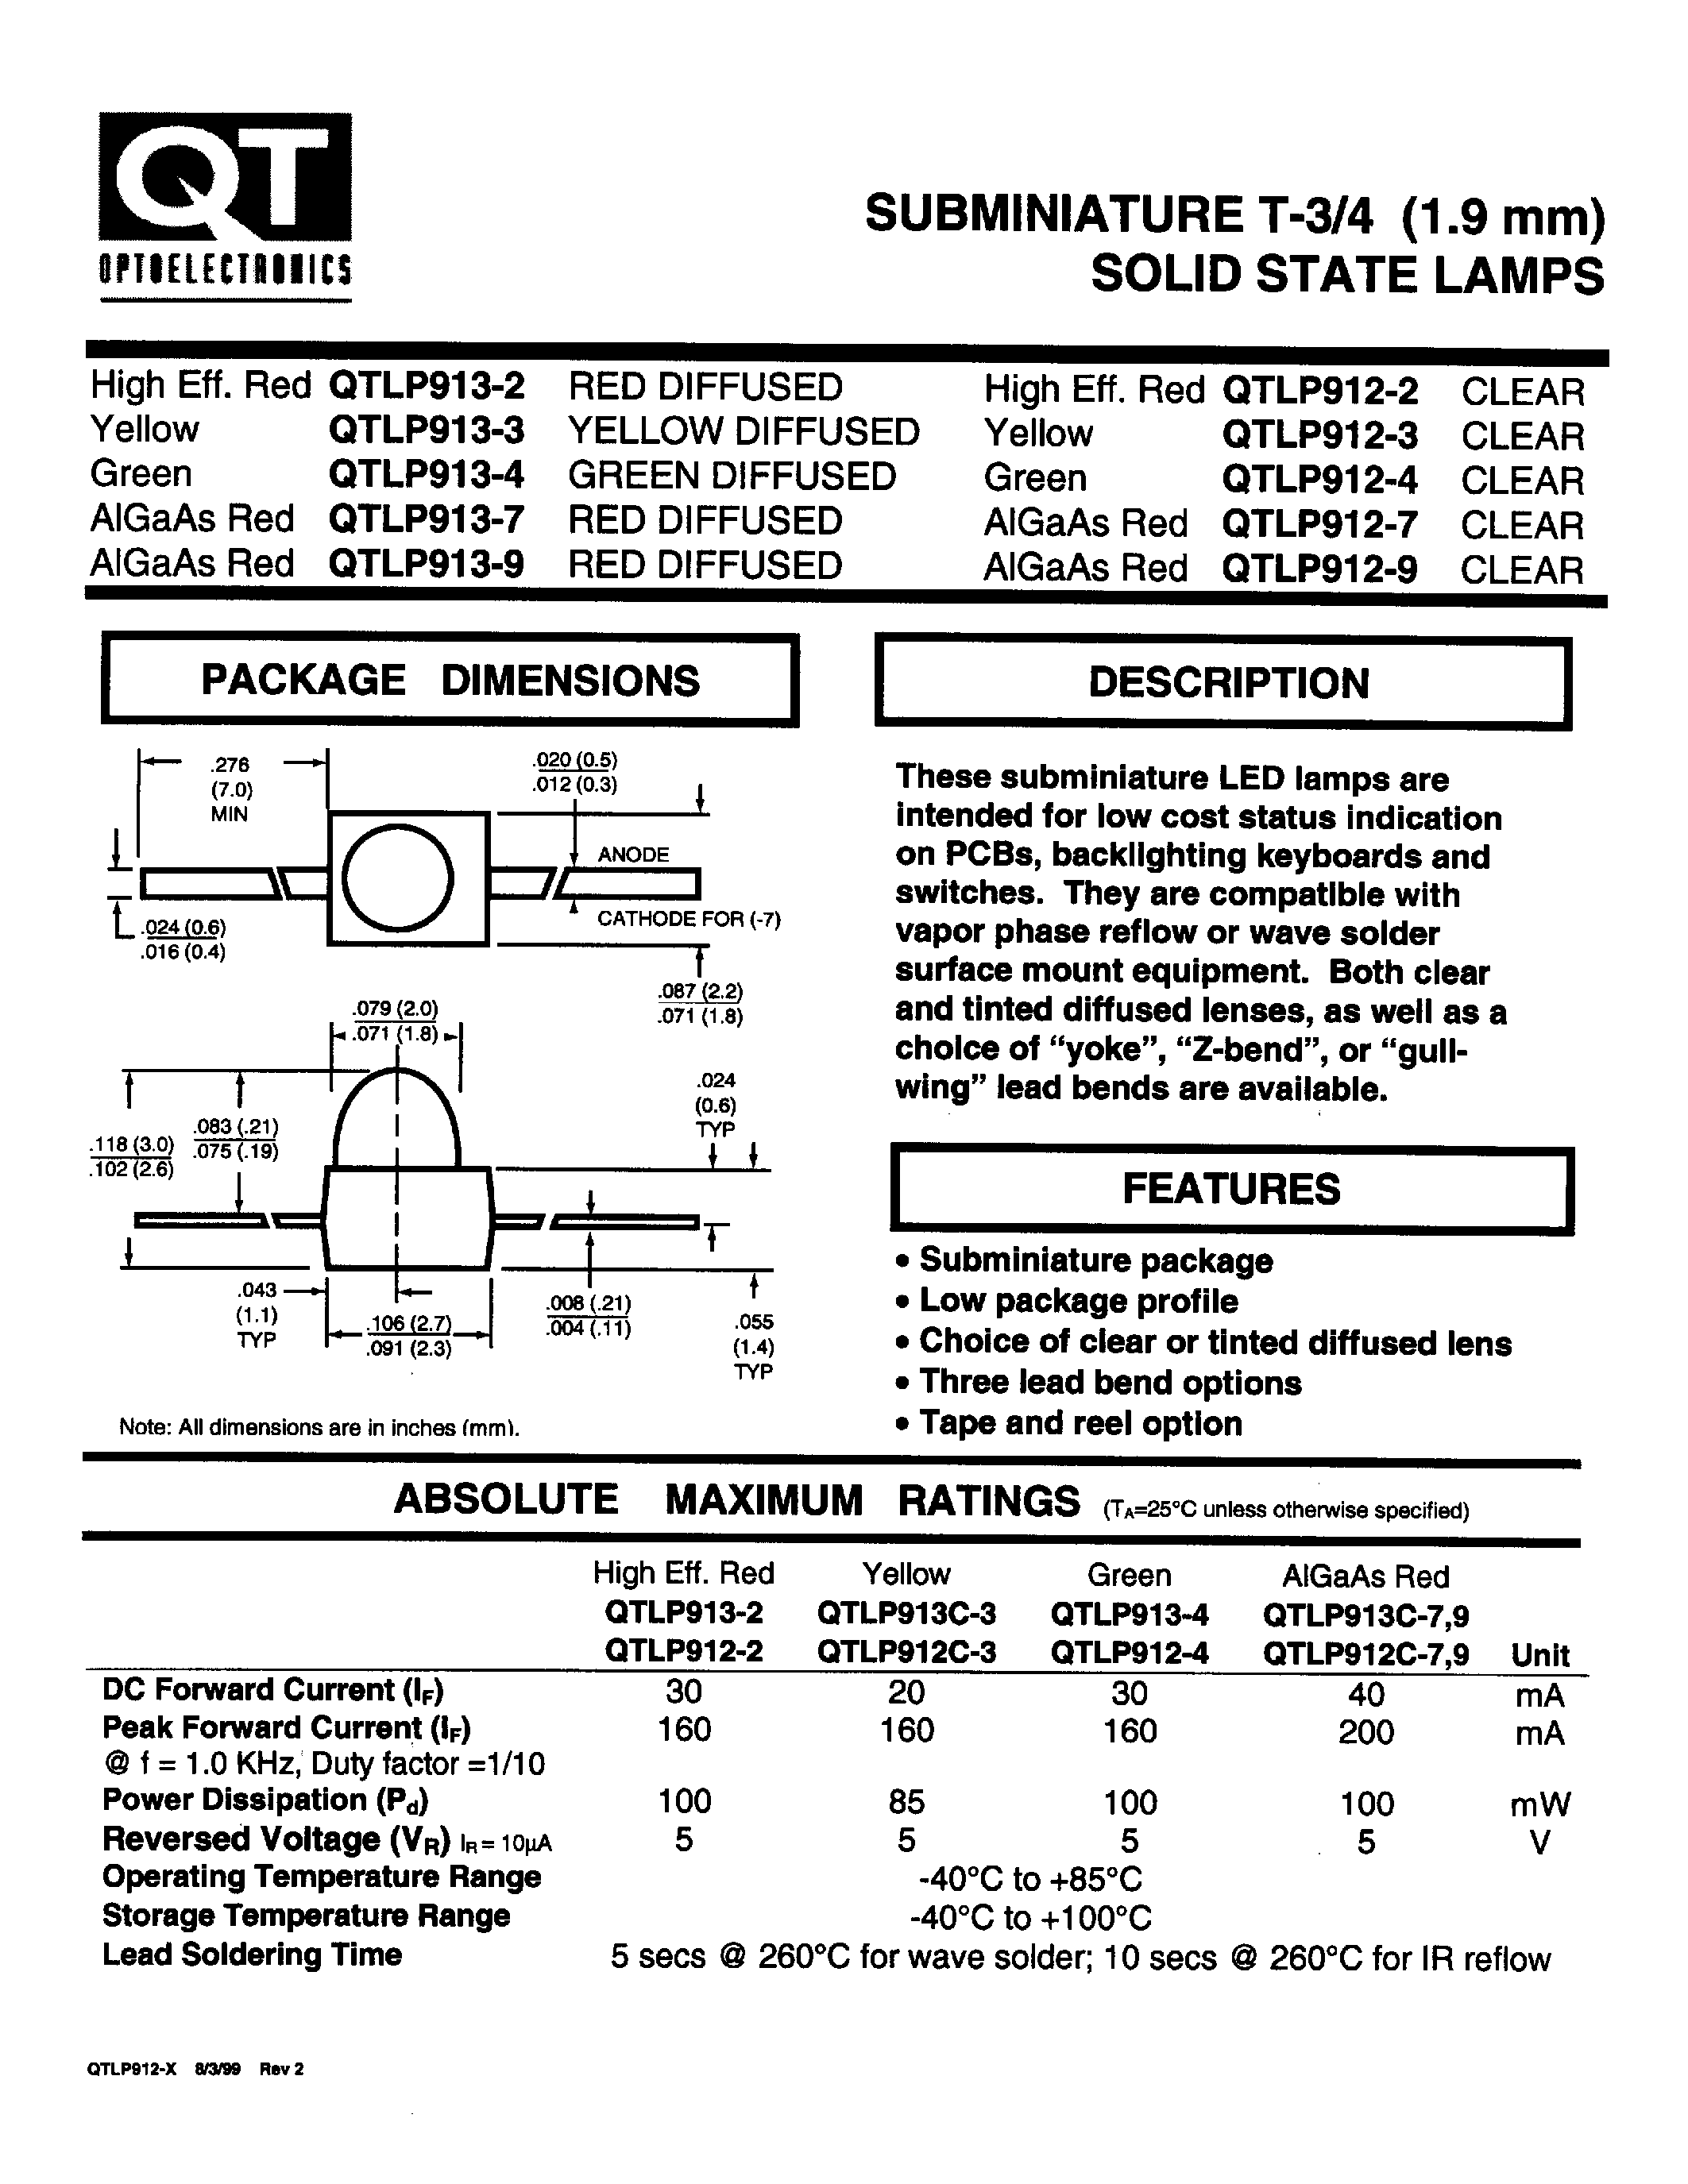 Даташит QTLP912-4 - SUBMINIATURE T-3/4 (1.9 mm) SOLID STATE LAMPS страница 1